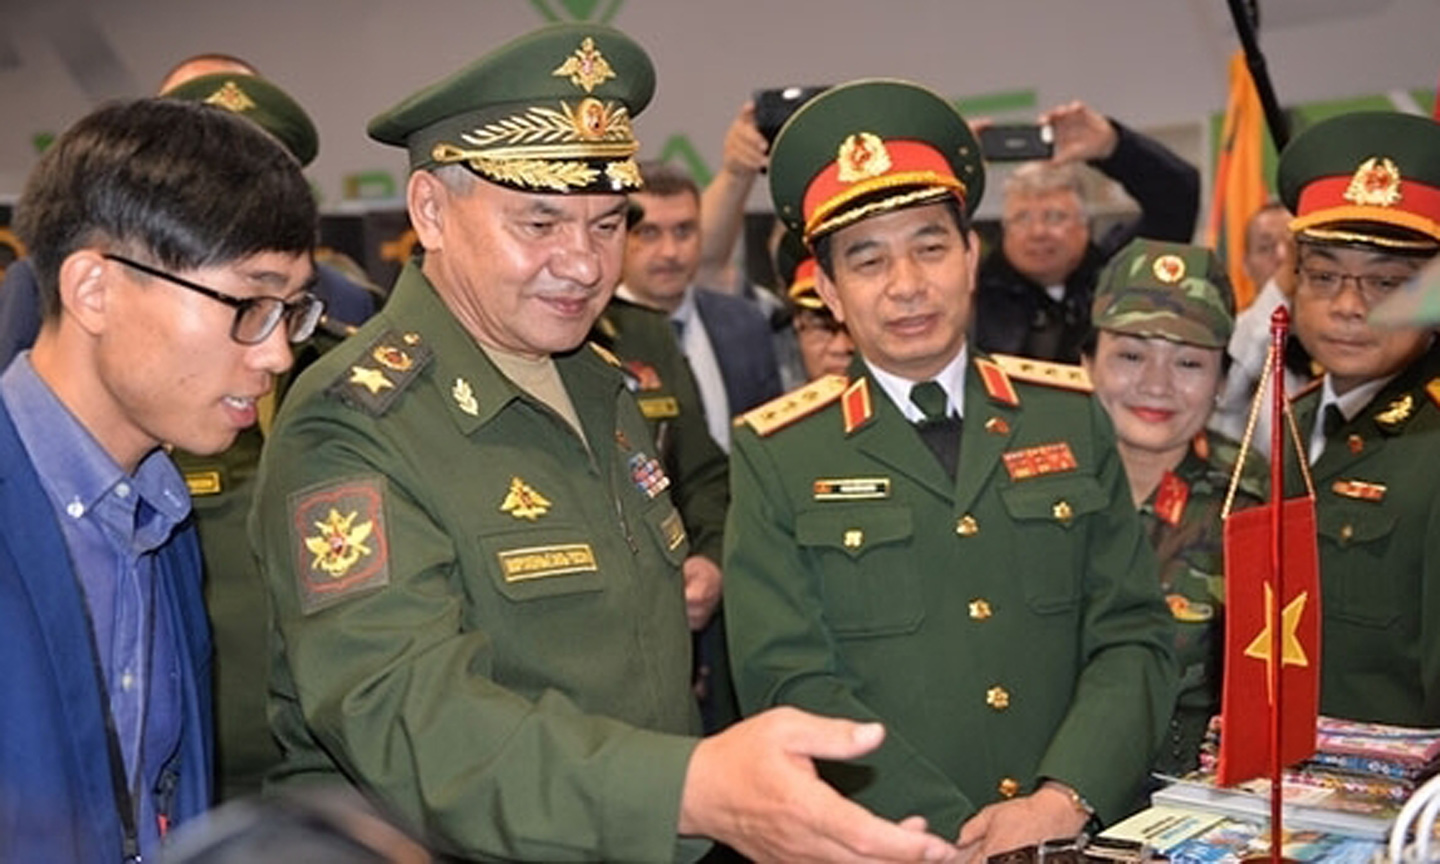 Russian Defence Minister Sergey Shoigu (C) visits Vietnam’s exhibition space at the Army Games 2019 friendship house with Vietnamese Deputy Minister of Defence, Senior Lieutenant General Phan Van Giang (R). (Photo: NDO/Nam Dong)